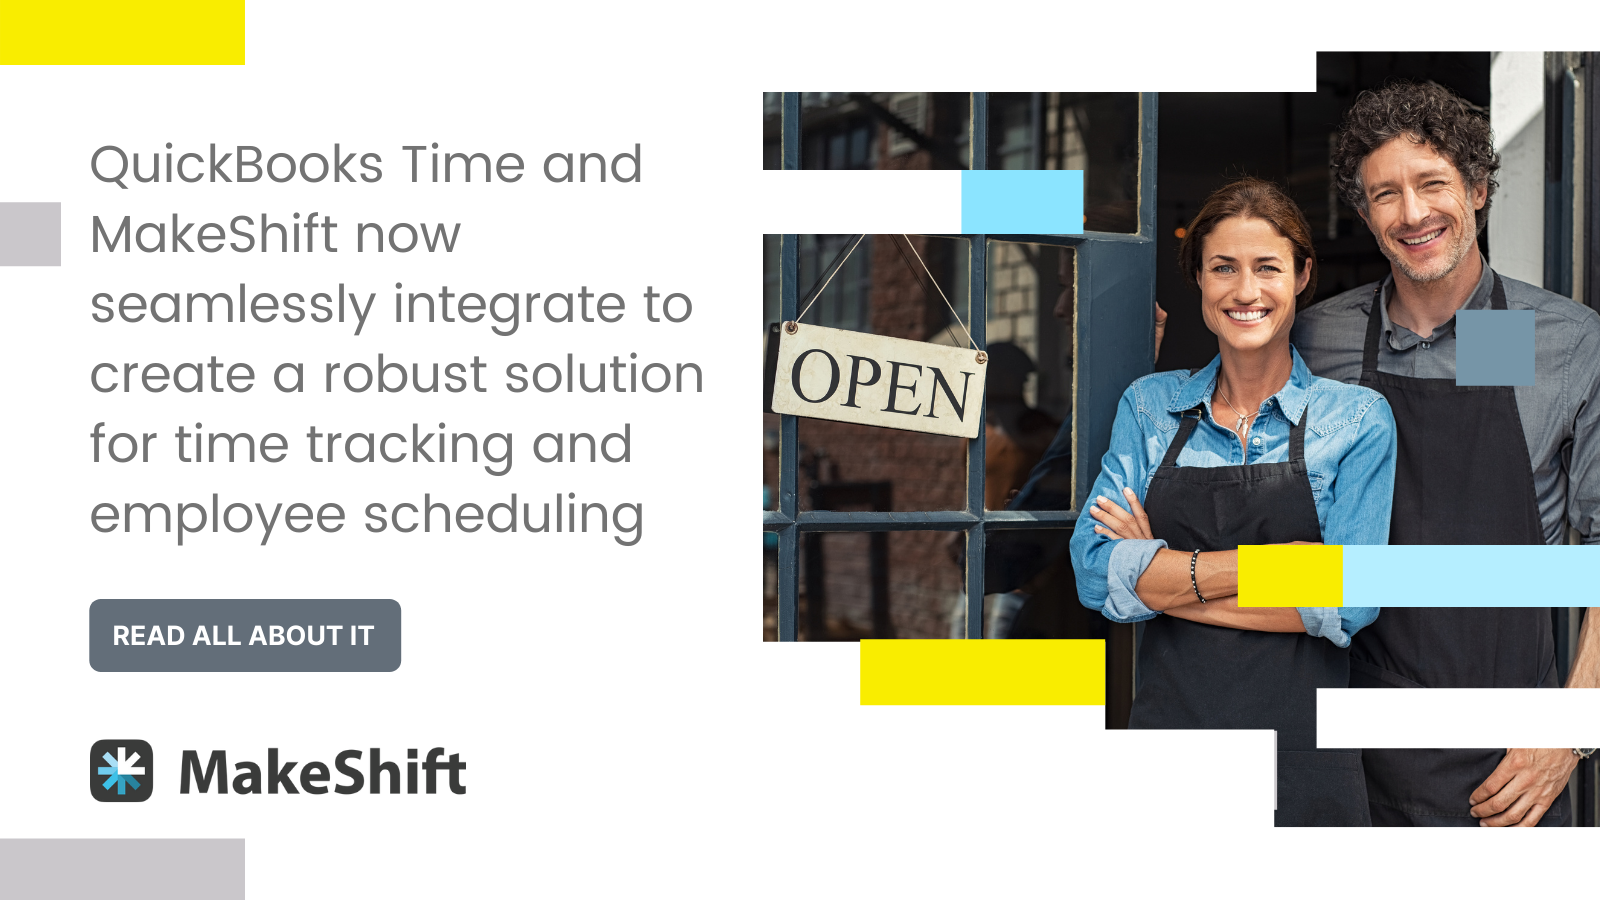 Looking for a time tracking and advanced scheduling solution that integrates with payroll?